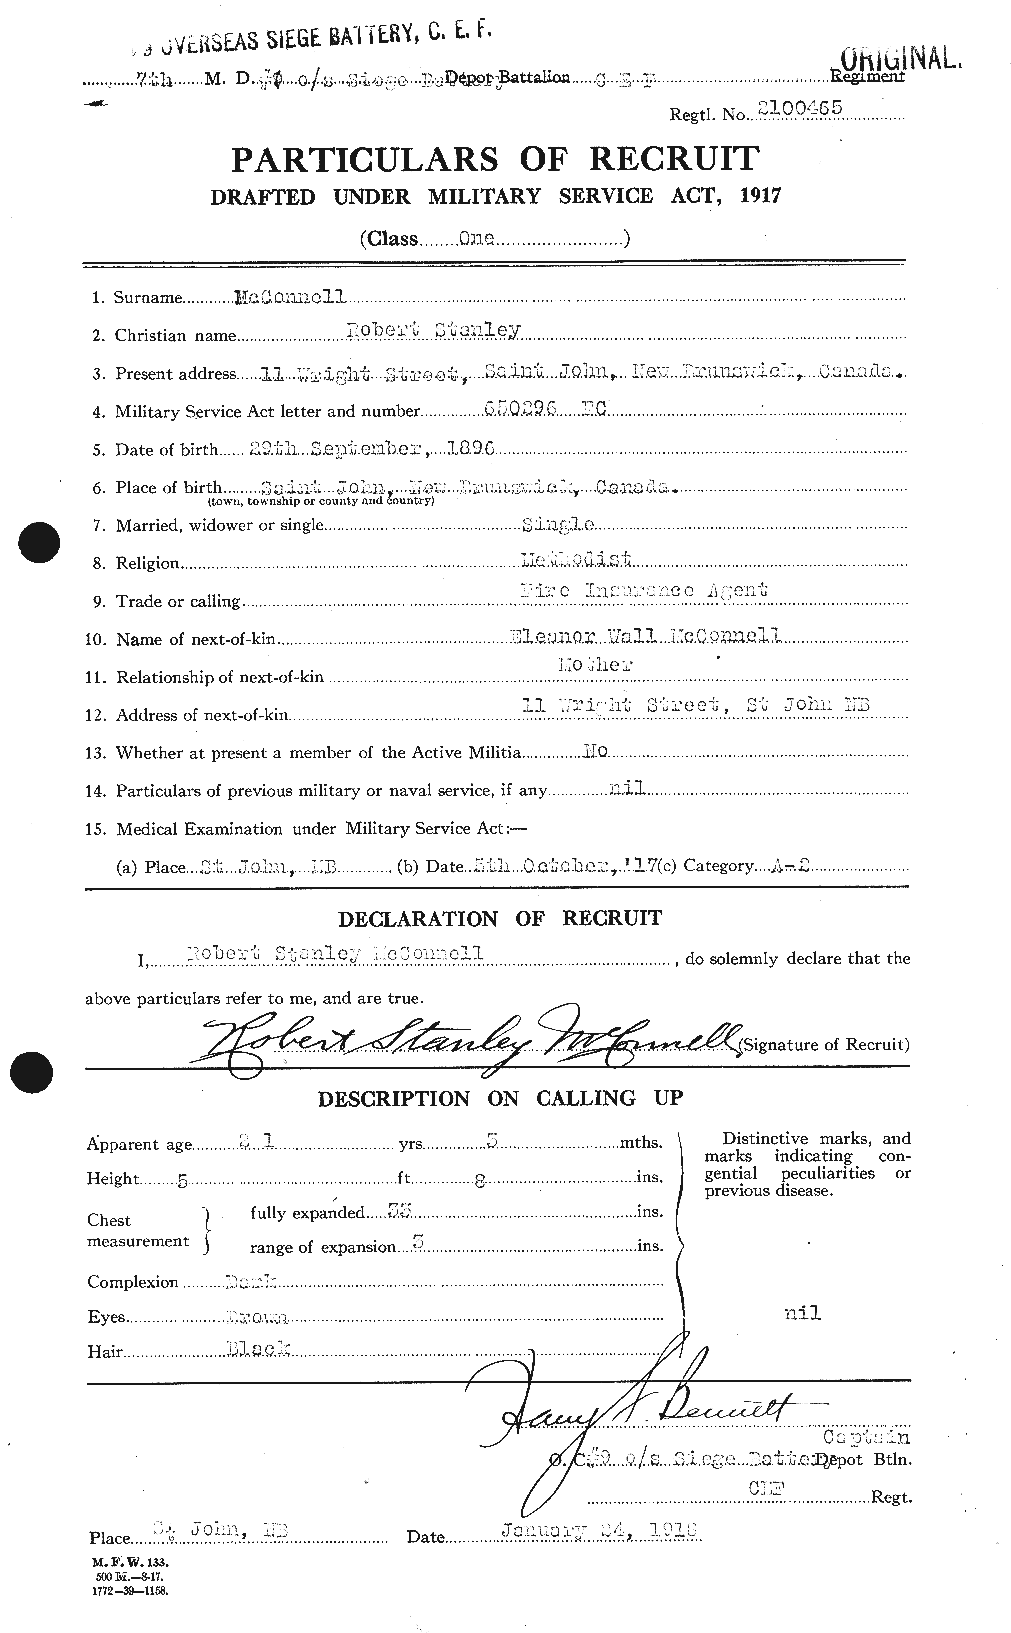 Personnel Records of the First World War - CEF 134391a